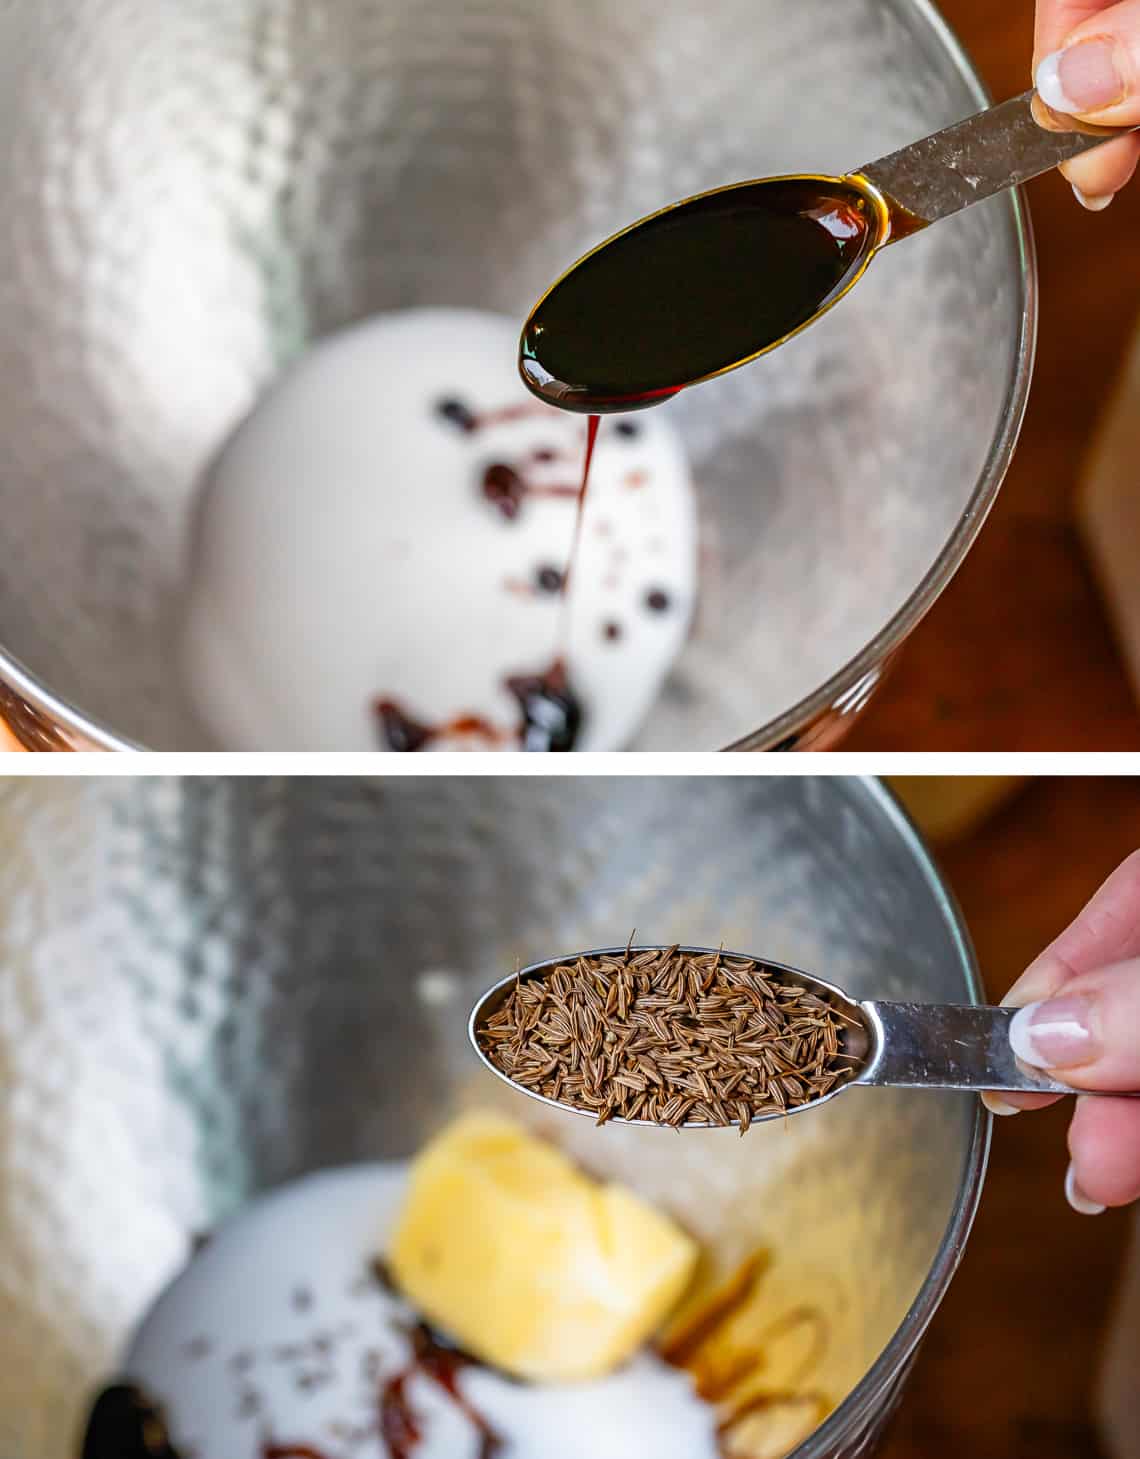 top adding molasses to a mixing bowl, bottom adding caraway seeds to same mixing bowl.